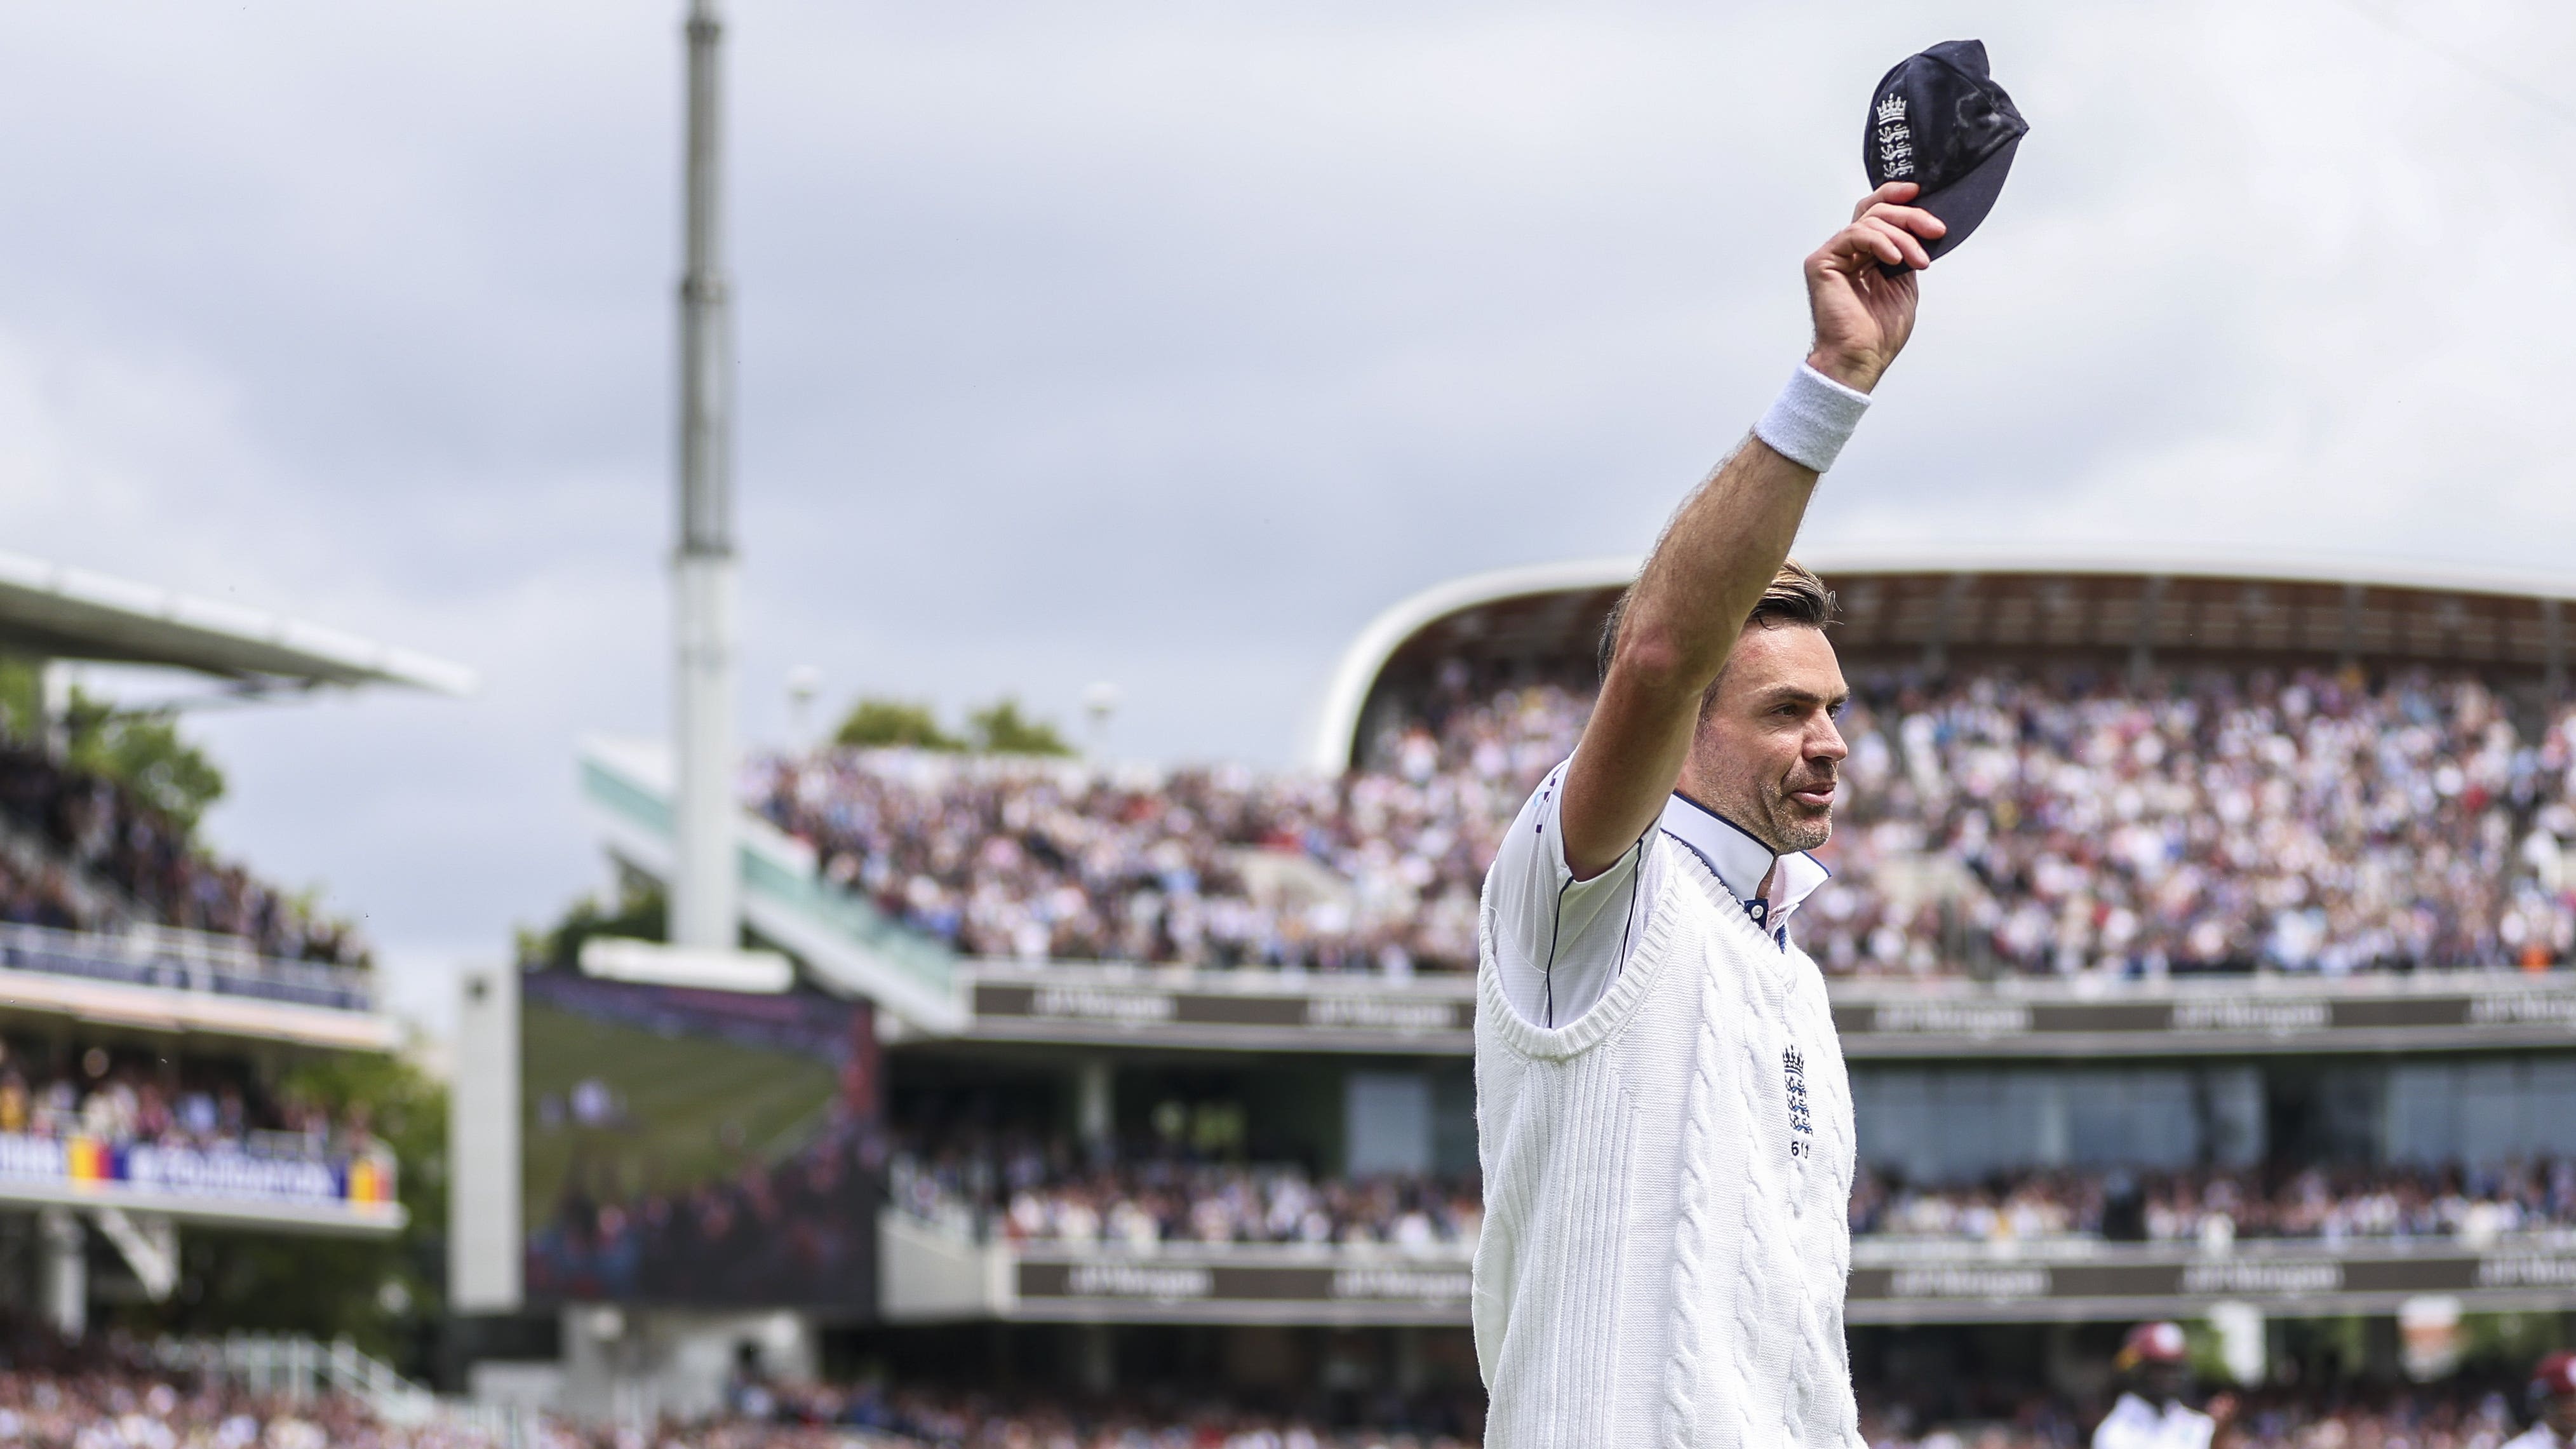 James Anderson retains a thirst for Test cricket on the day he says goodbye